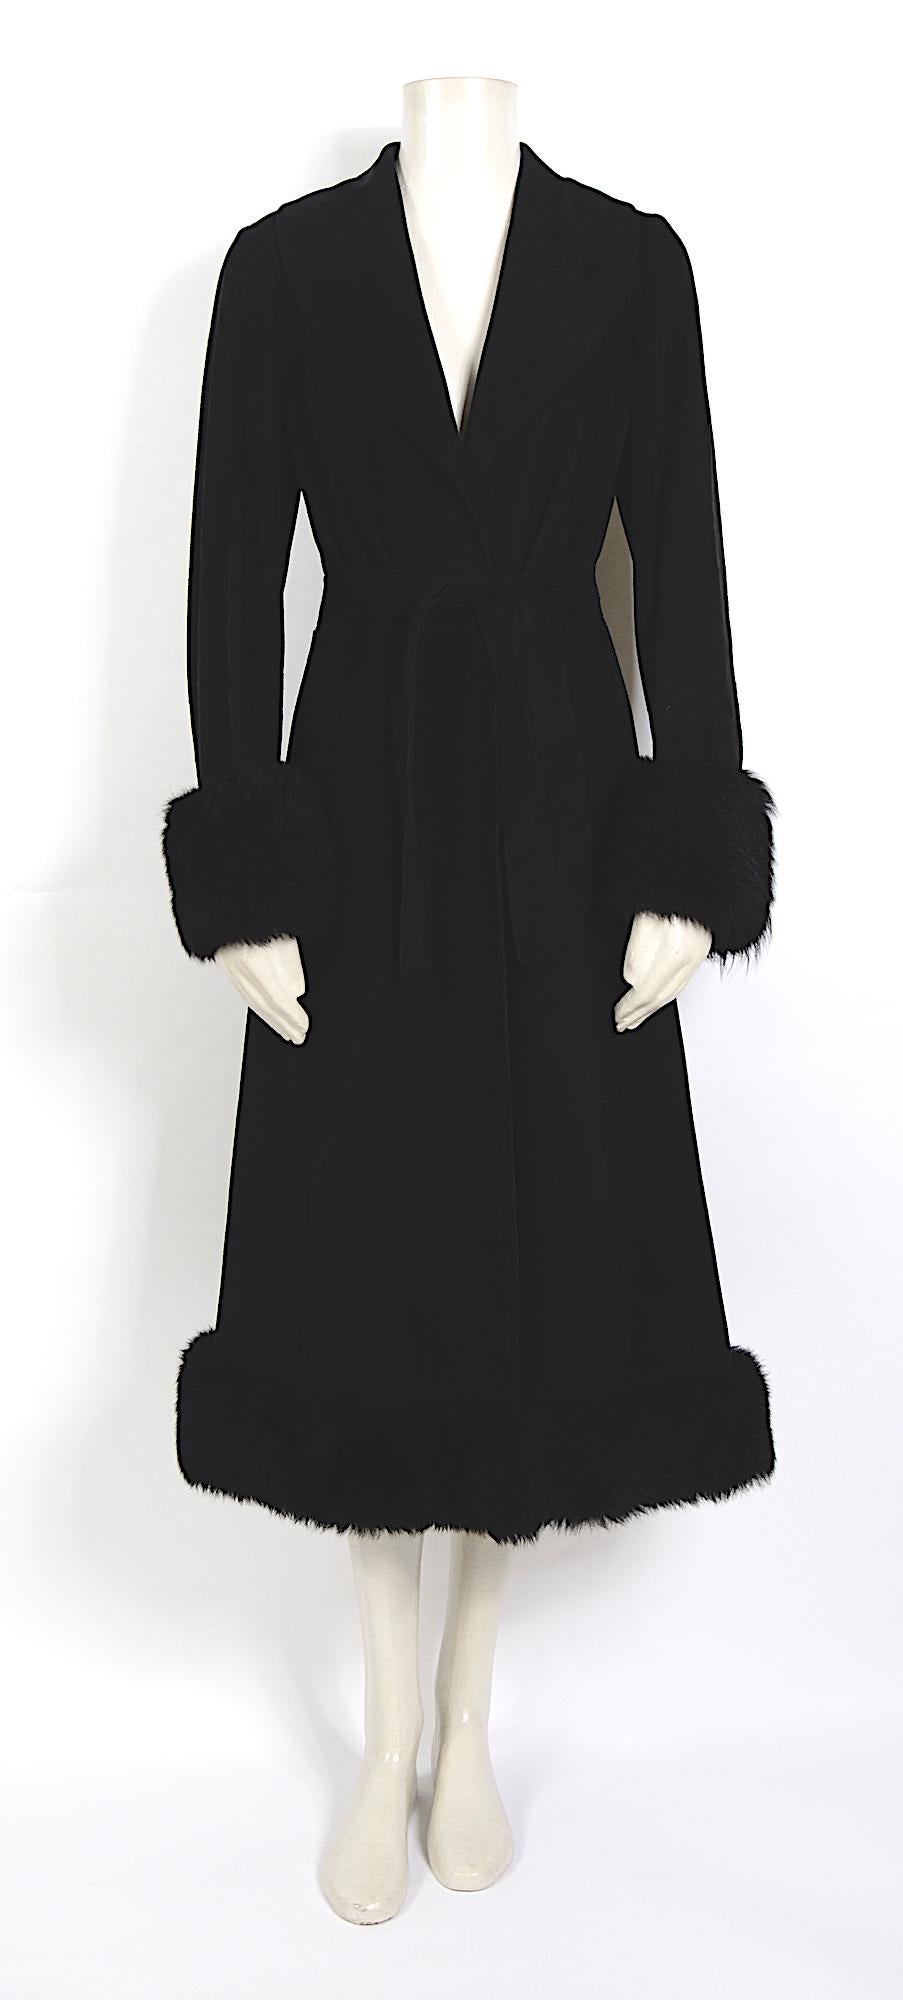 Stunning 1960s vintage Lanvin black suede belted coat with removable fur collar...
Lanvin designed by either Antonio del Castillo or Jules-Francois Crahay, who was the head designer from 1963 until 1984. 
After that time there was a succession of